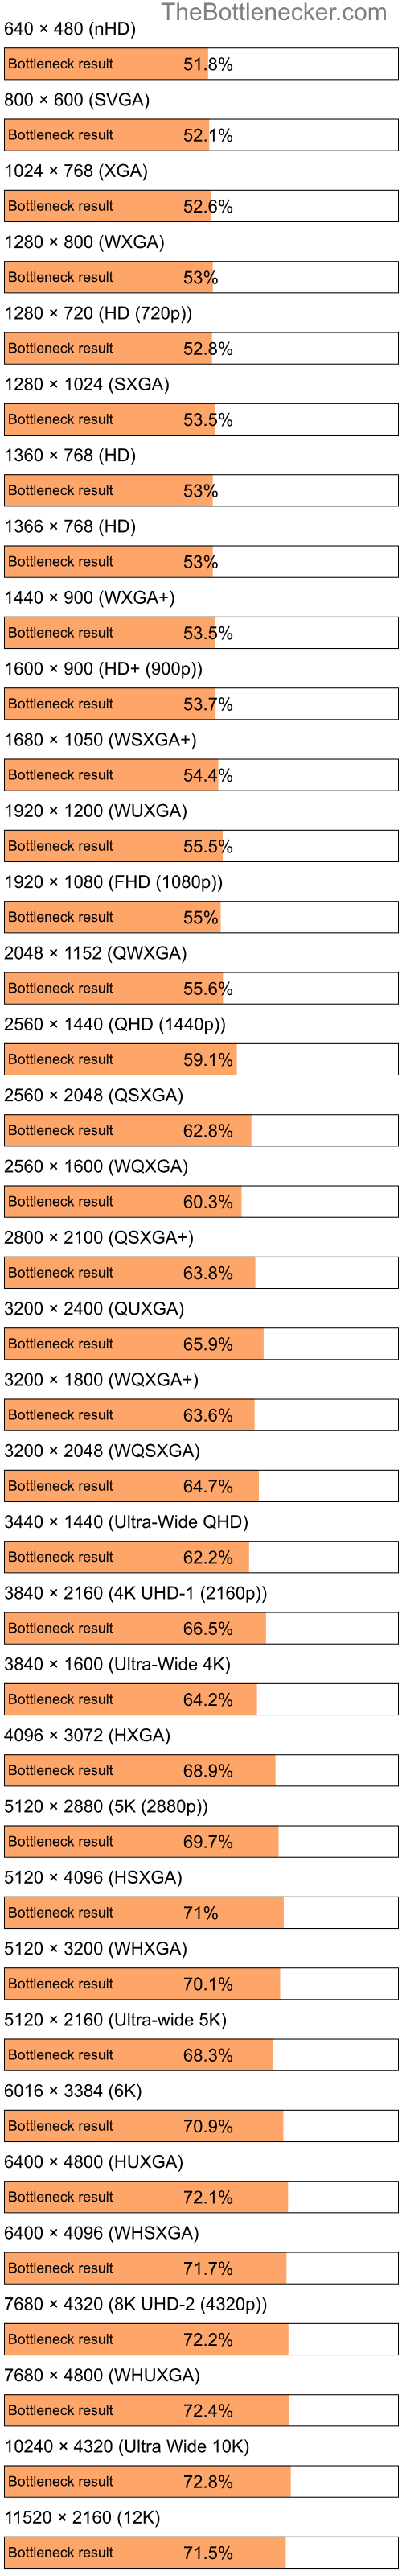 Bottleneck results by resolution for Intel Pentium 4 and NVIDIA GeForce 6800 in Processor Intense Tasks